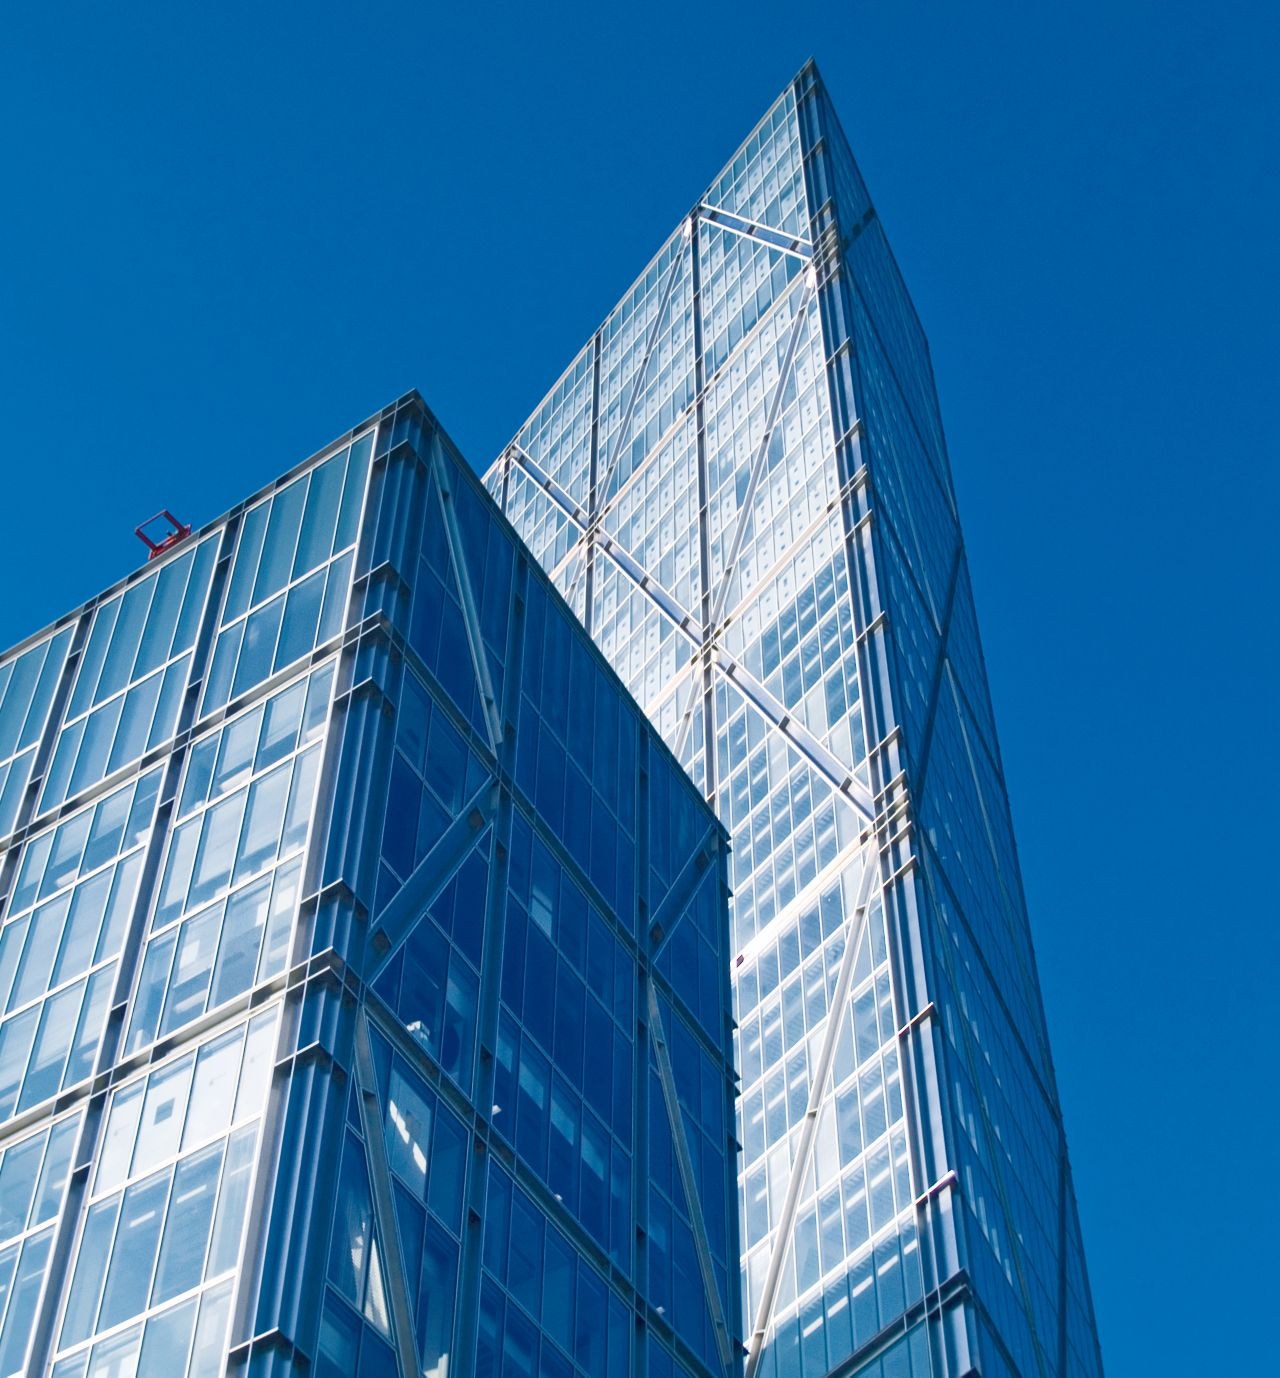 High-rise buildings with glass facade